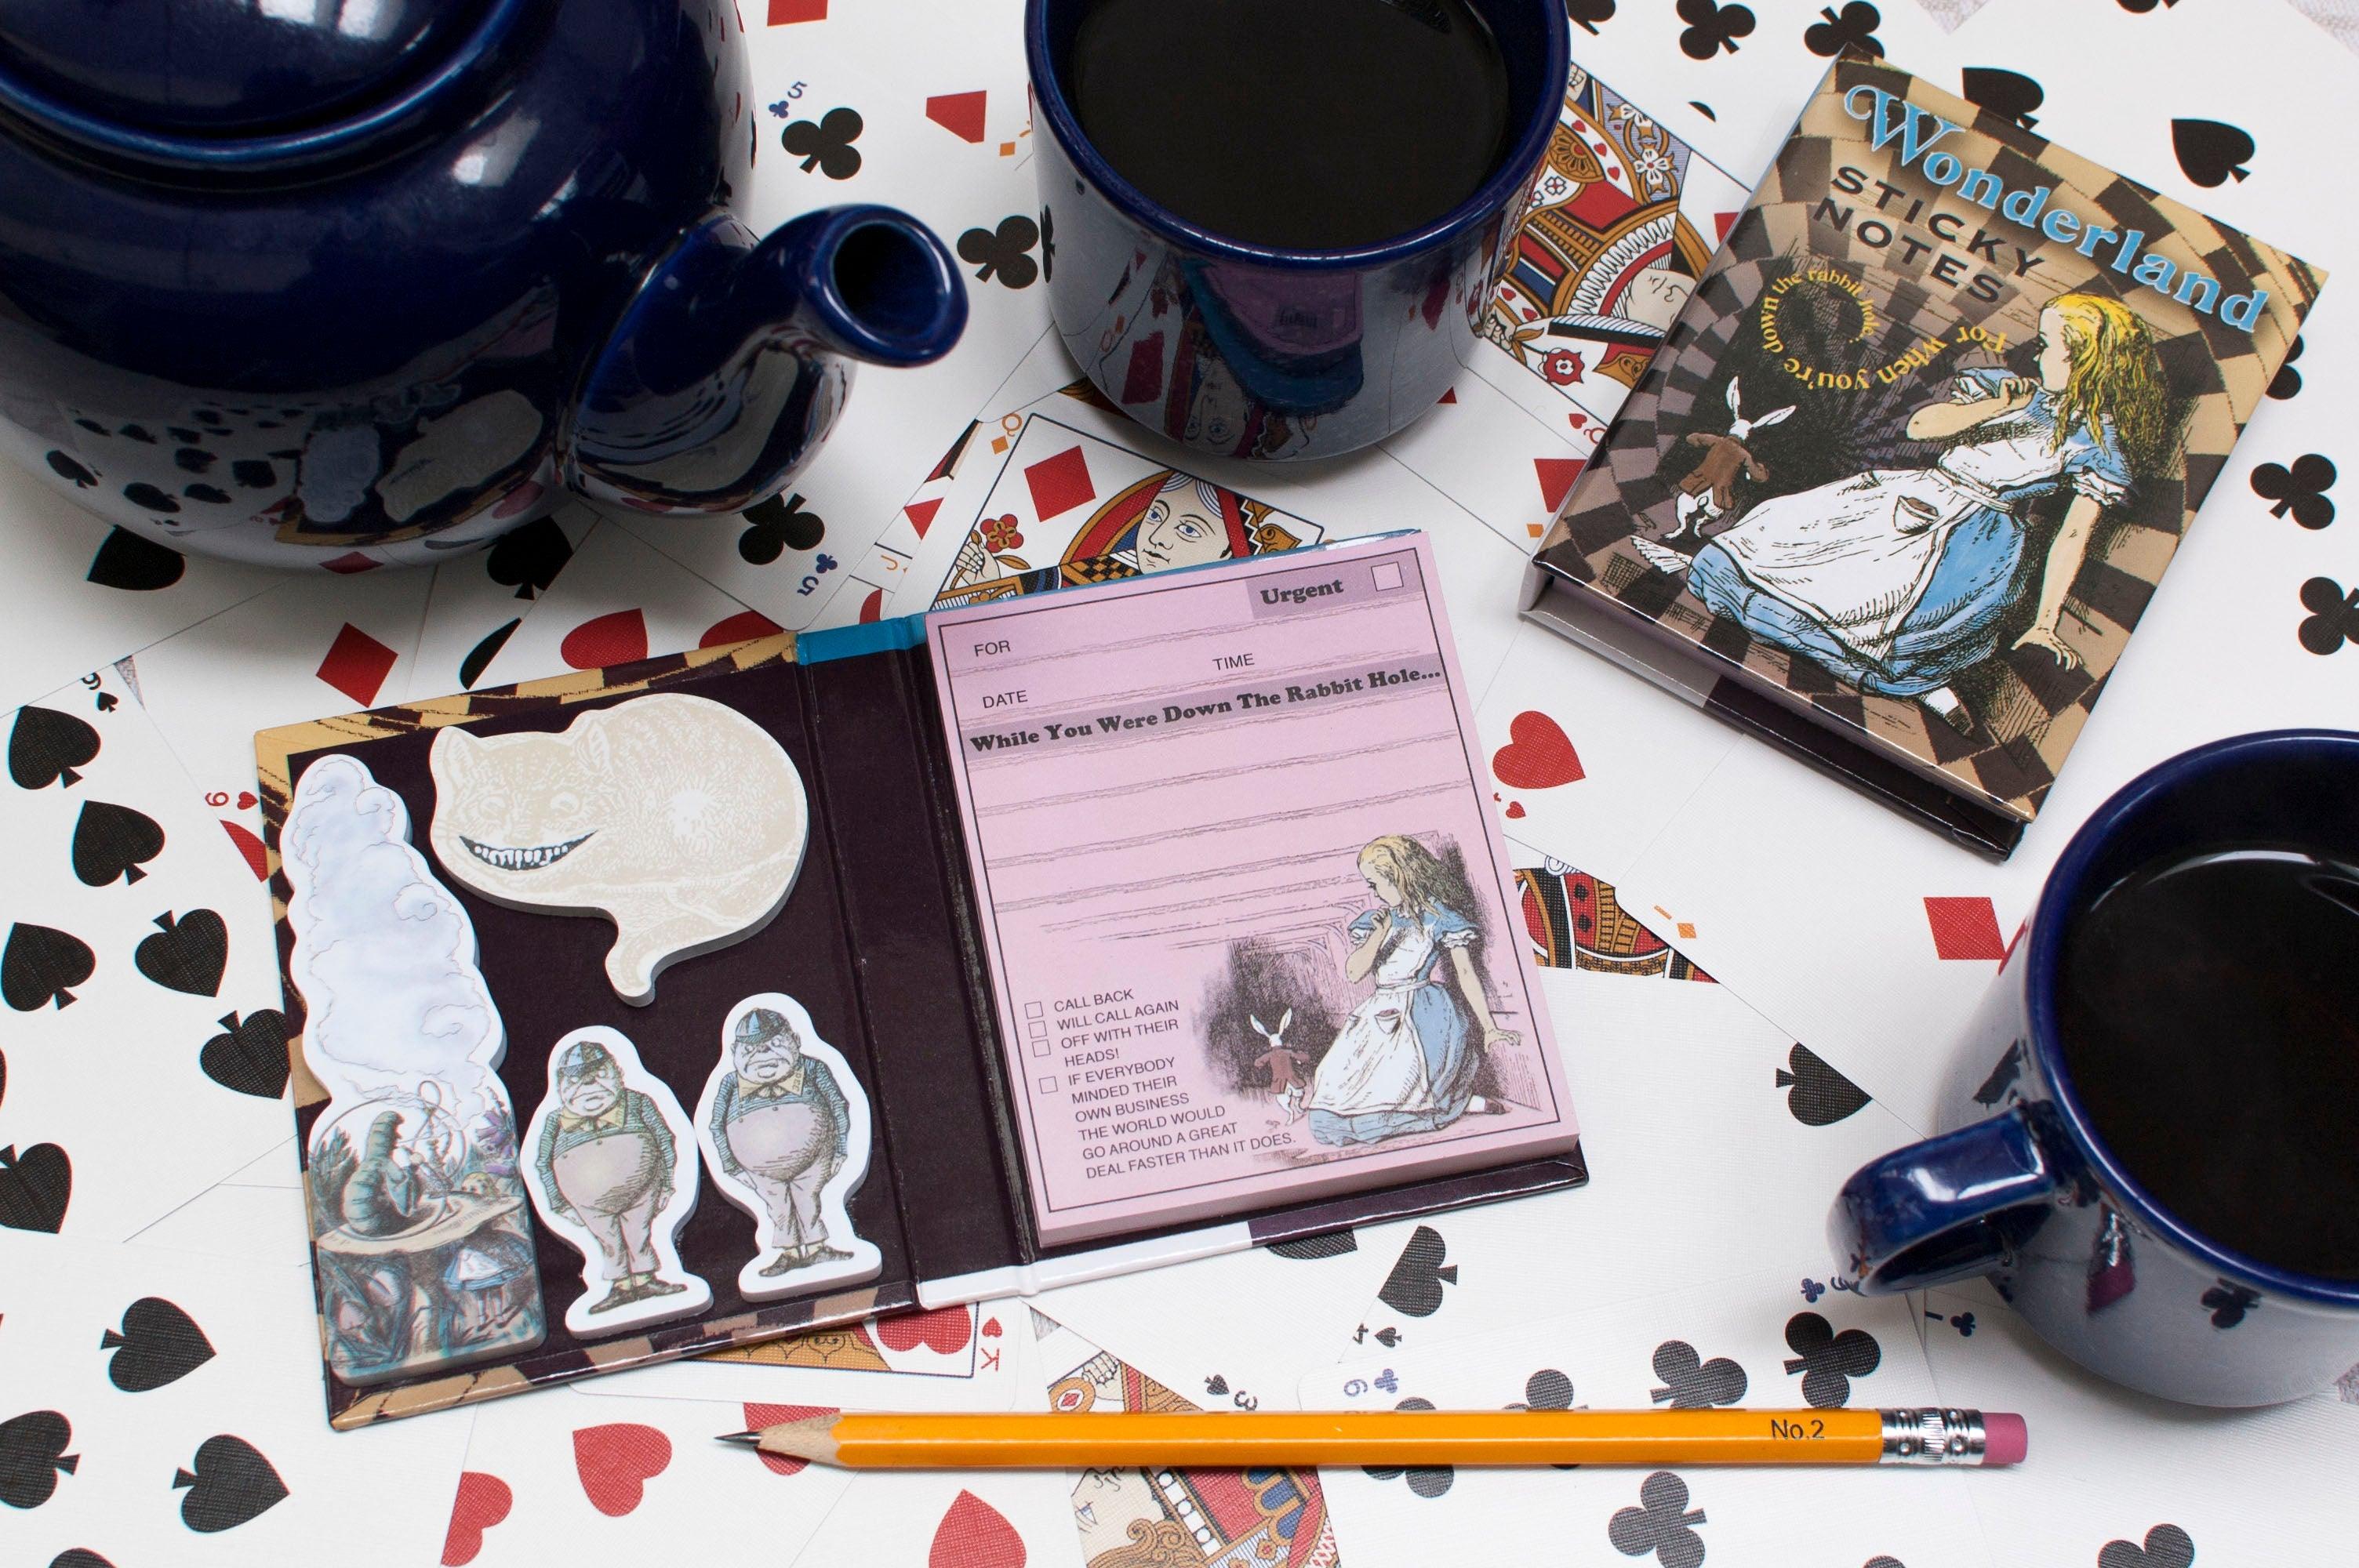 Product photo of Alice in Wonderland Notes, a novelty gift manufactured by The Unemployed Philosophers Guild.